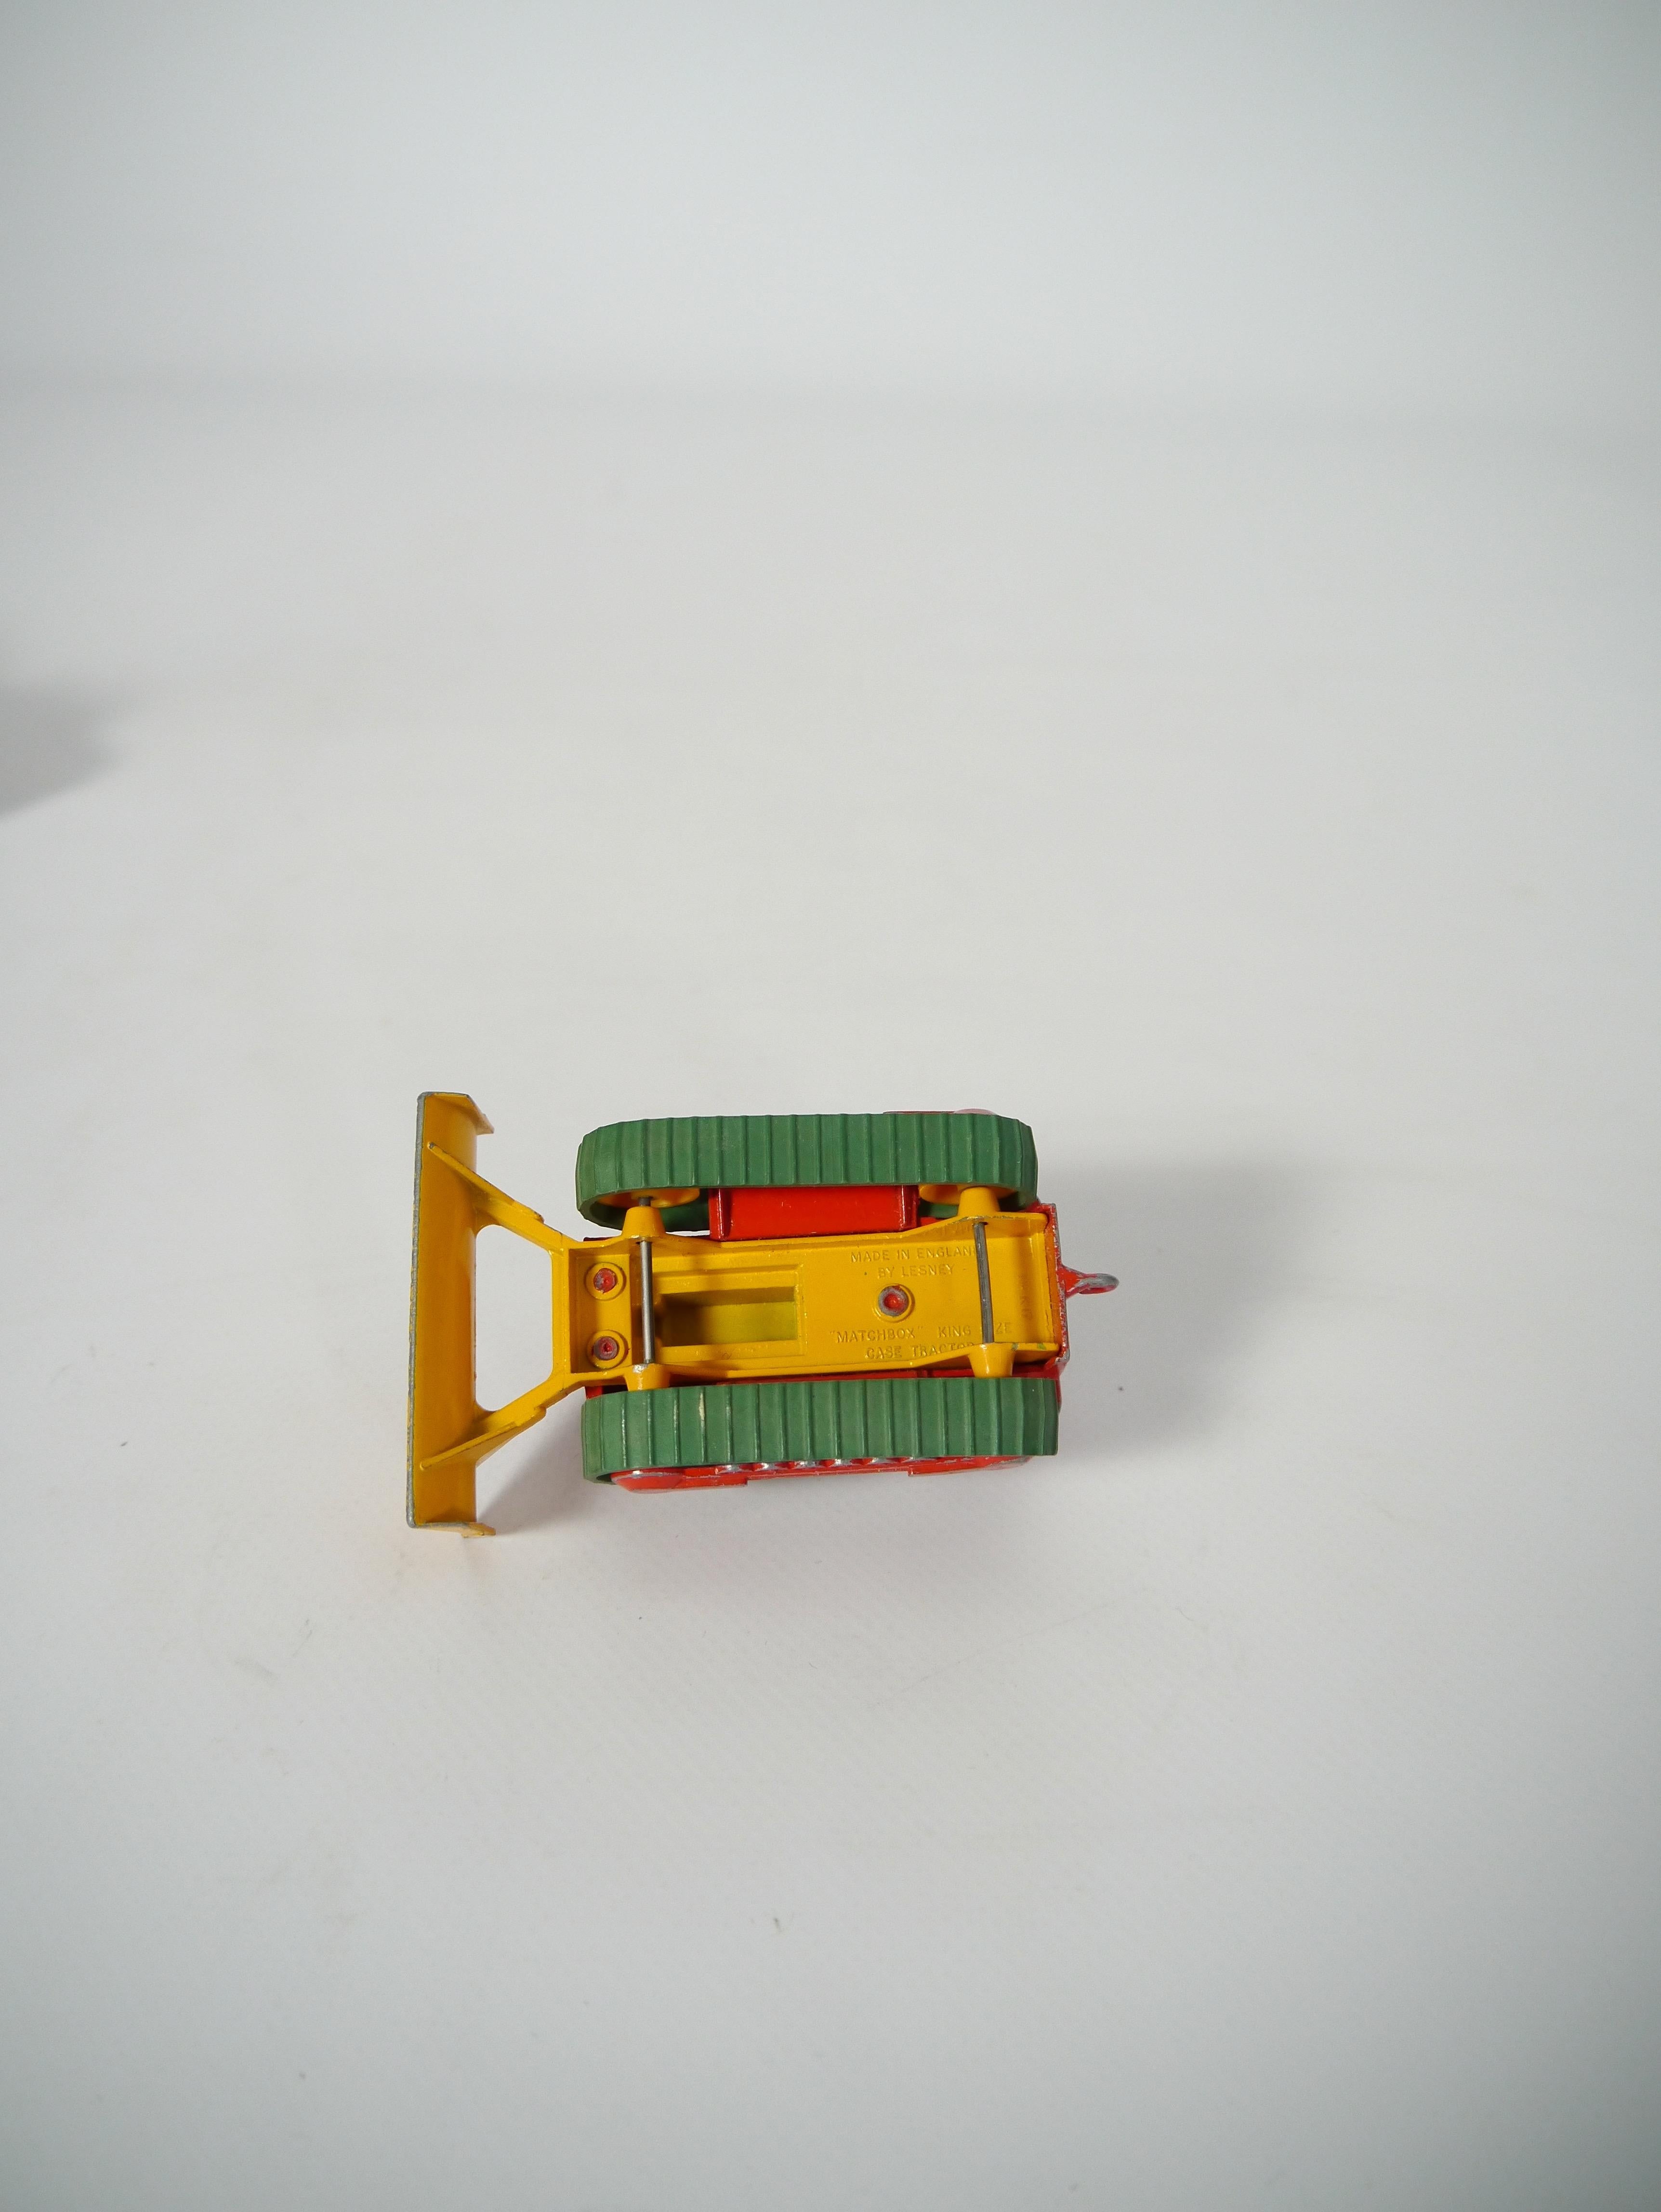 Three Matchbox Toy Construction Machines by Lesney, England, 1960-70s For Sale 2